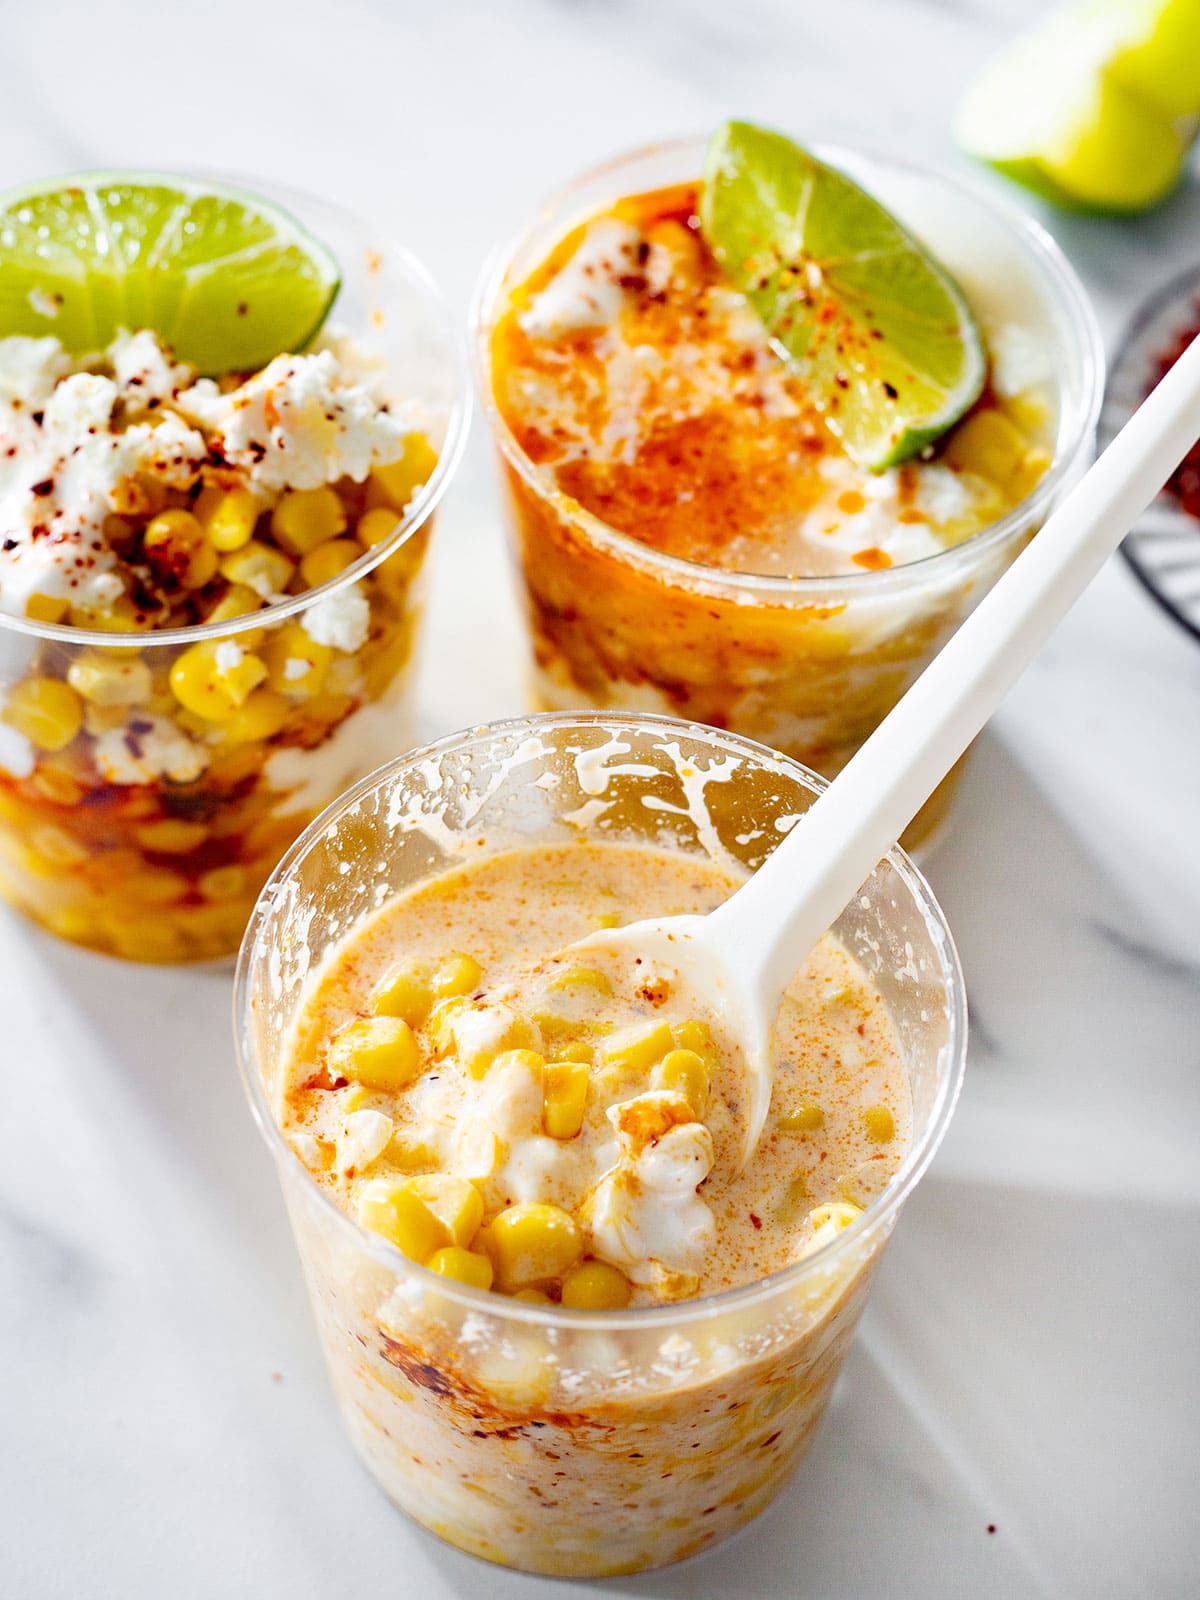 3 cups of elote en vaso, one of them mixed with a spoon.